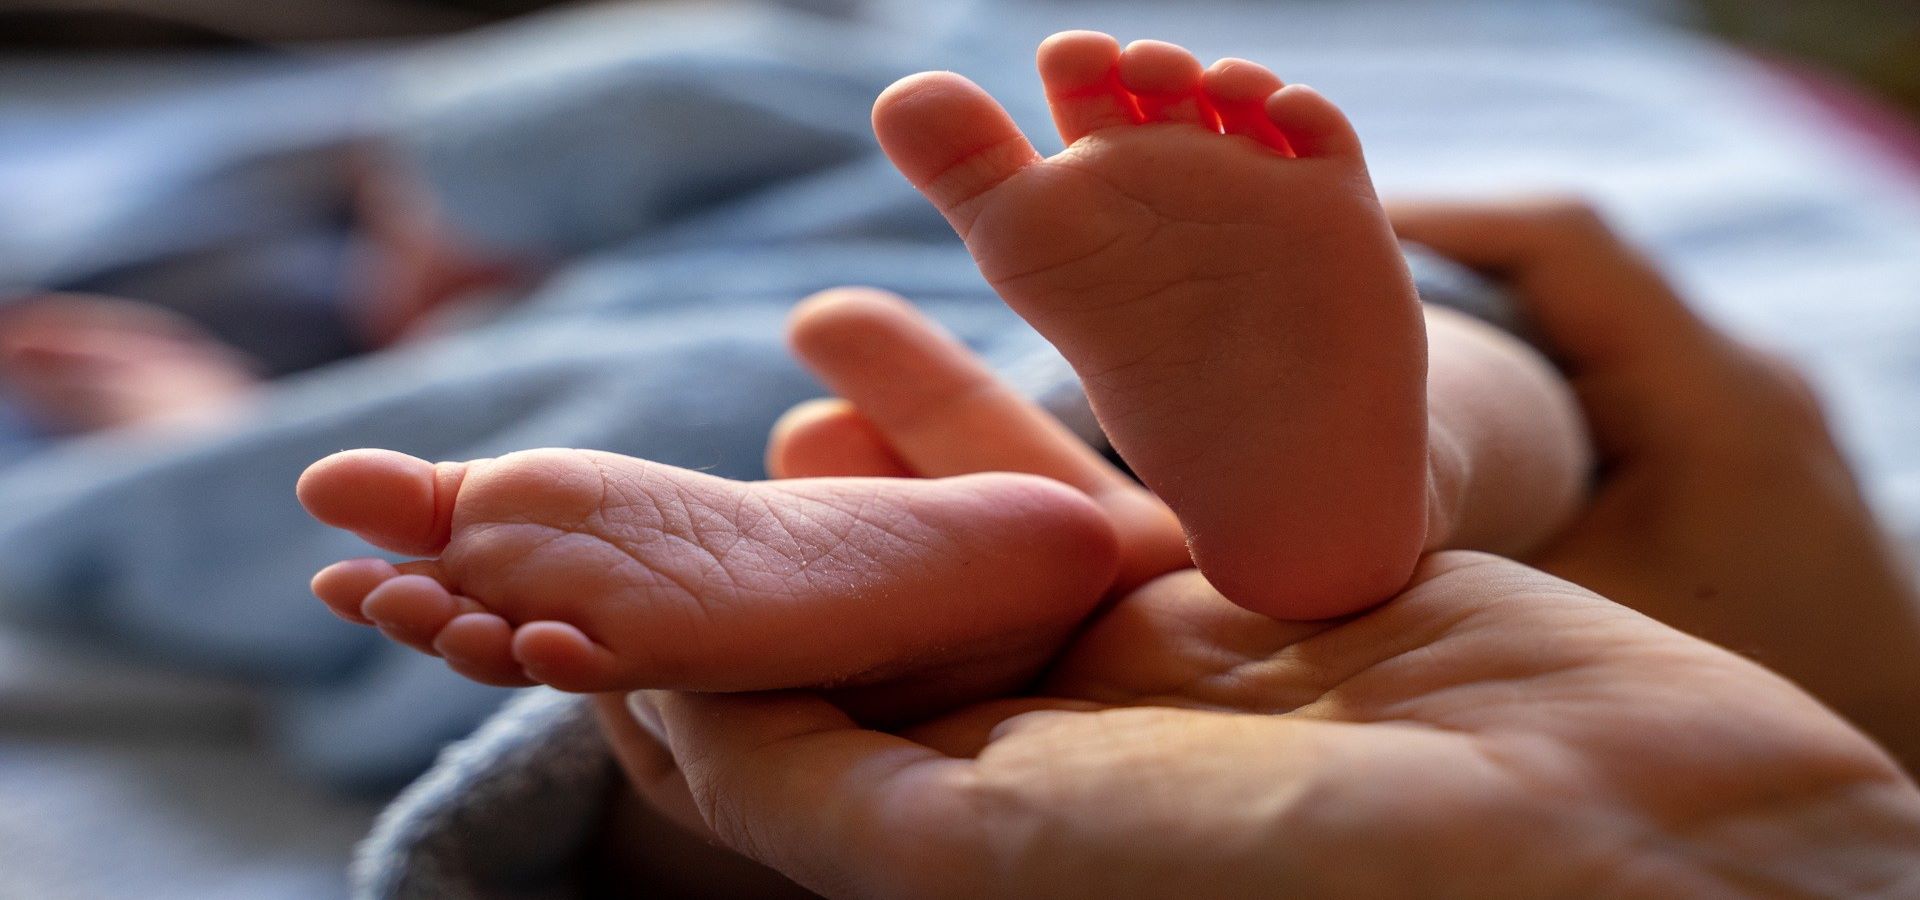 Were you born preterm? An online study is evaluating your health and quality of life